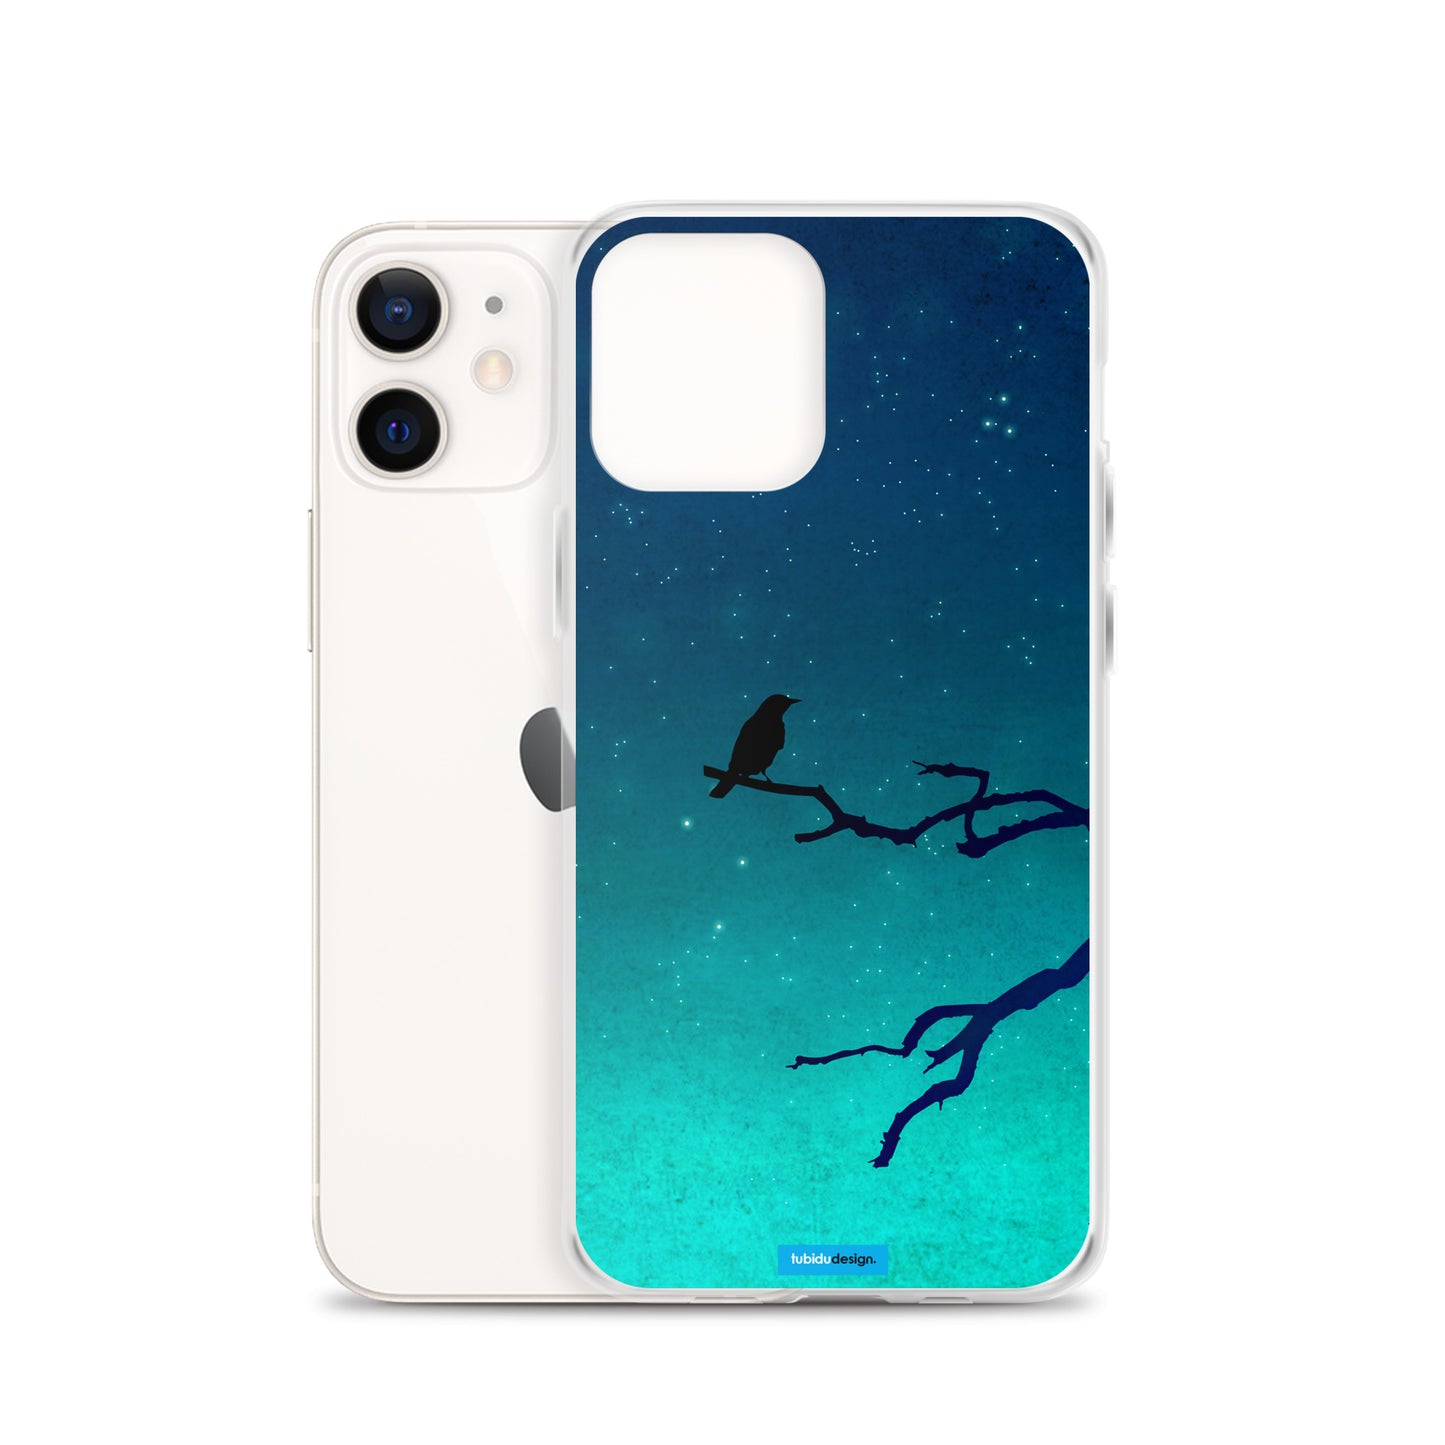 And then only the silence remains... - Illustrated iPhone Case